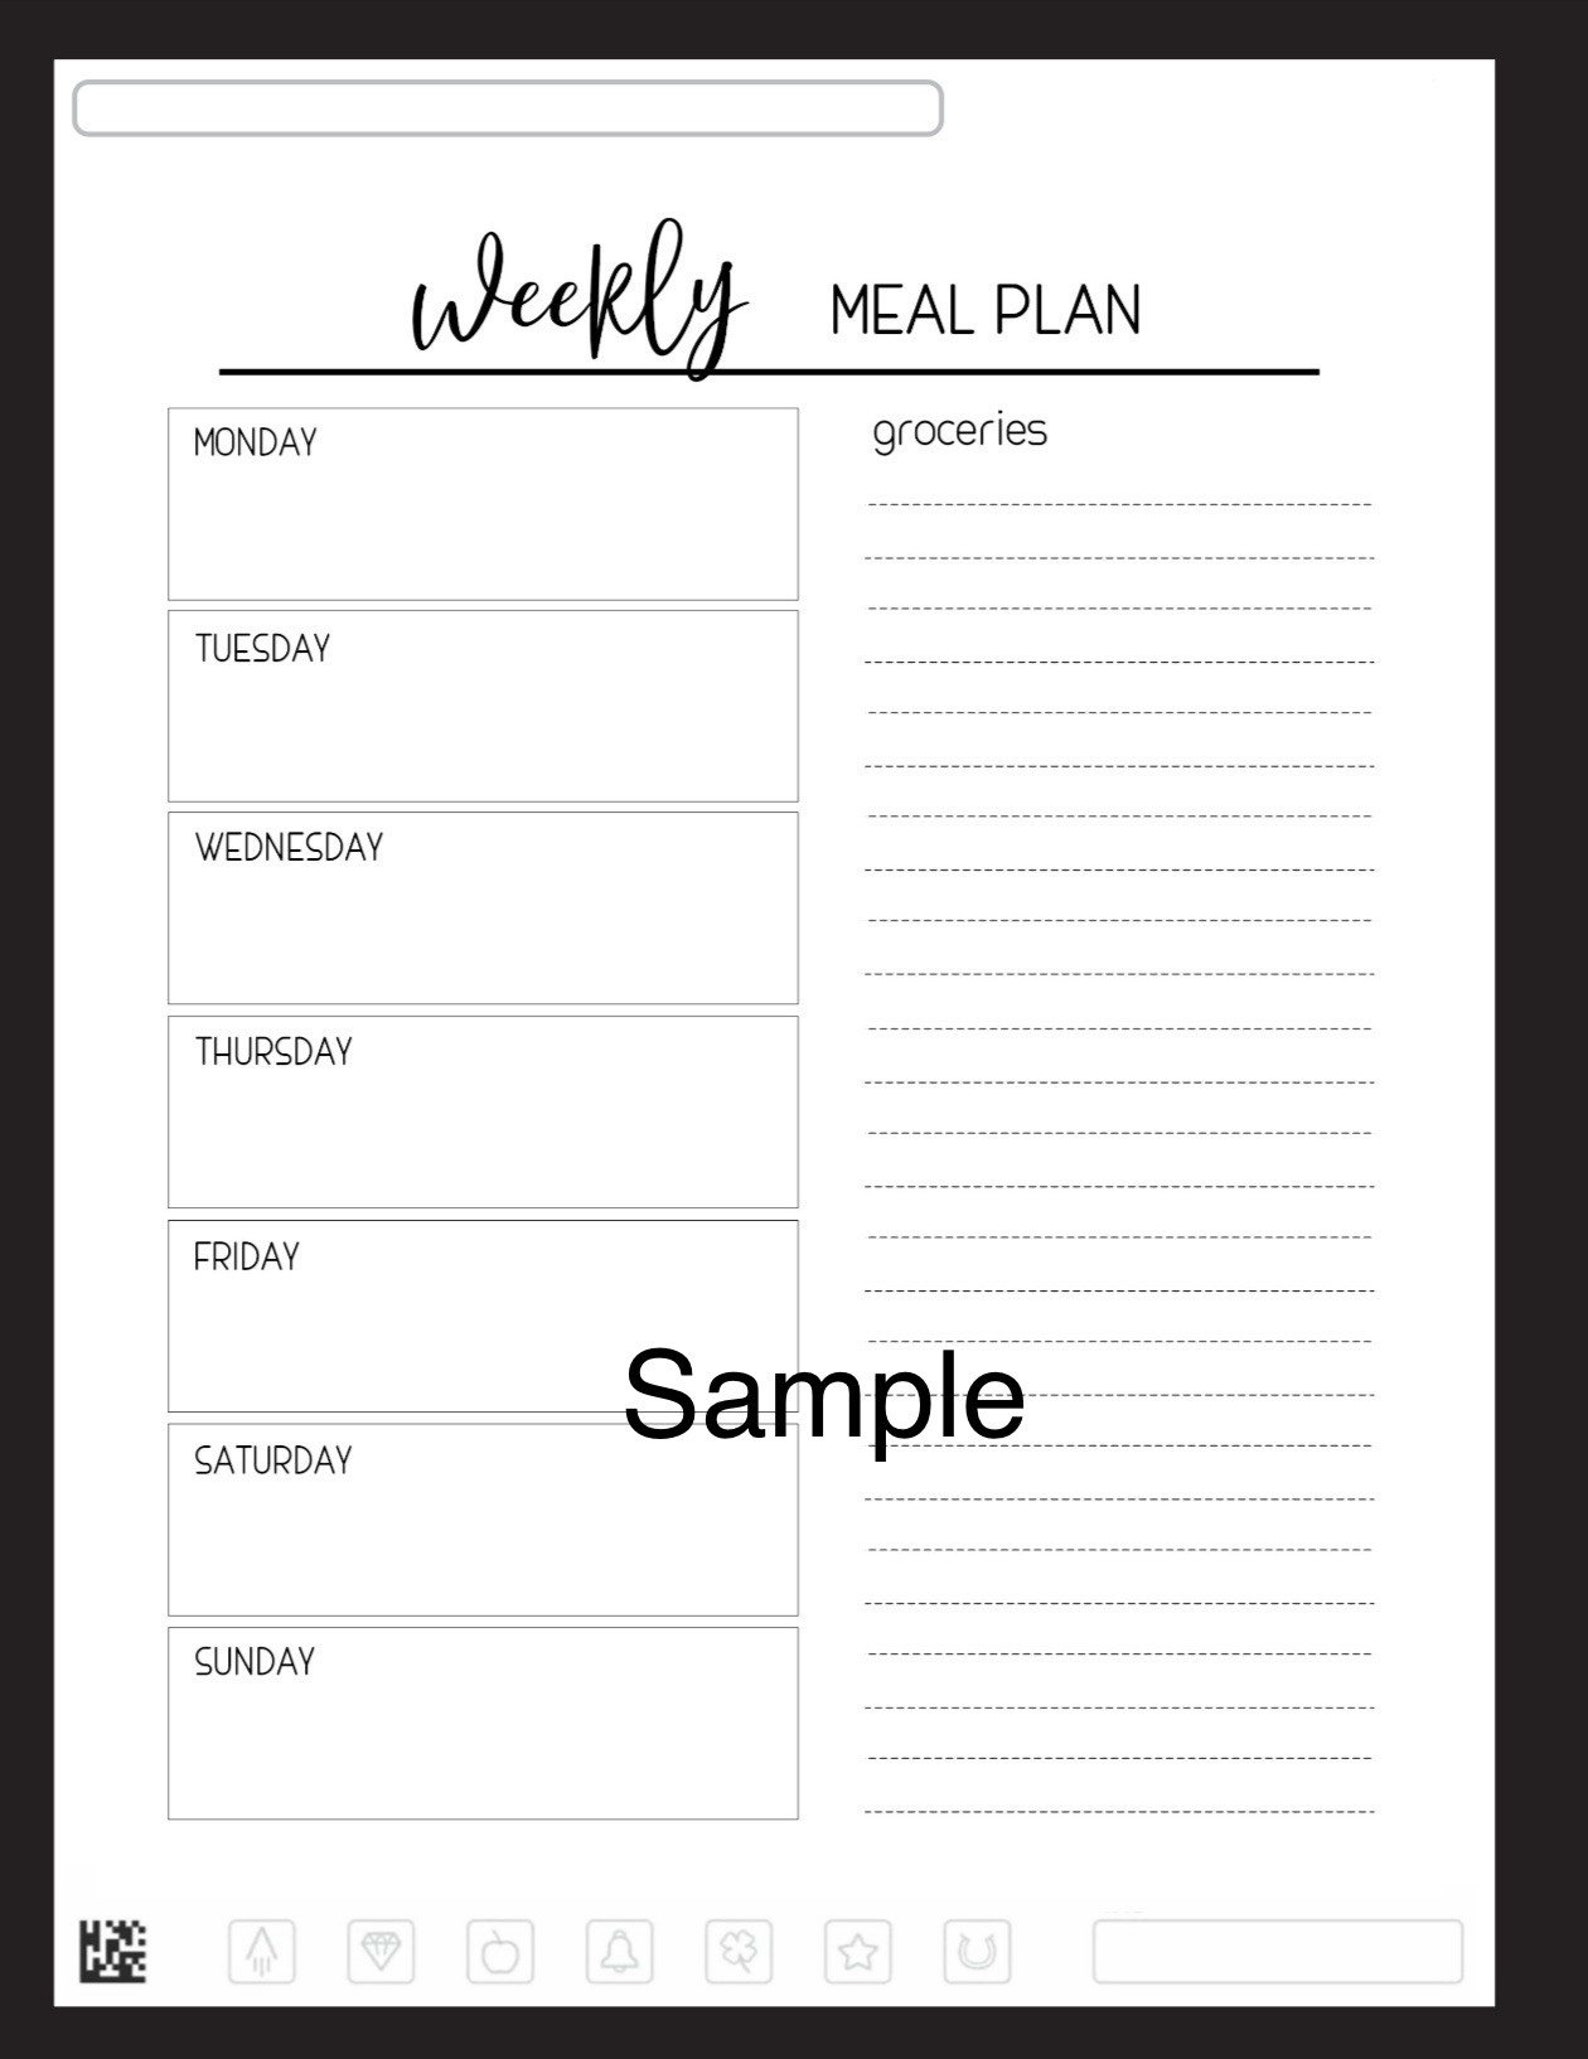 Weekly Meal Plan V1 Rocketbook Template - Etsy